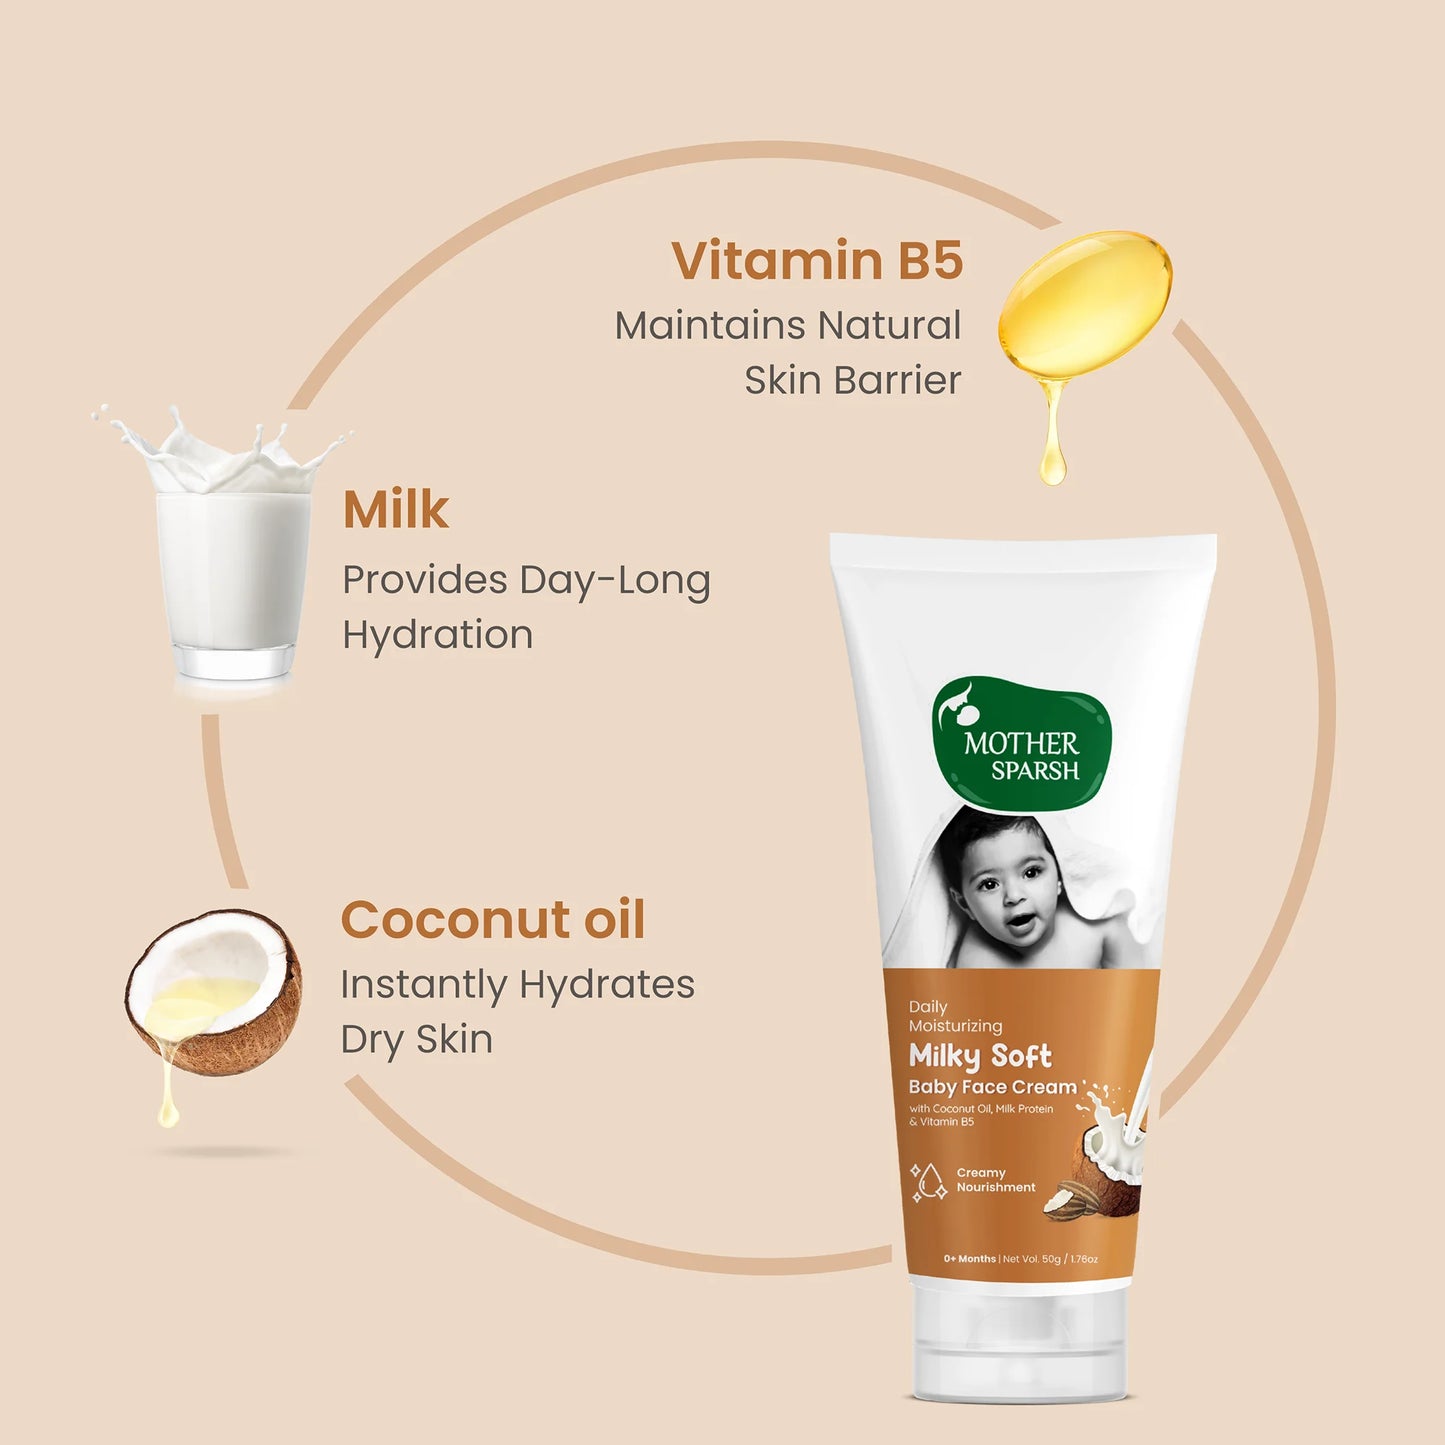 Choose-Whats-actually-good-for-baby-Milky-soft-baby-face-cream-best-baby-face-cream